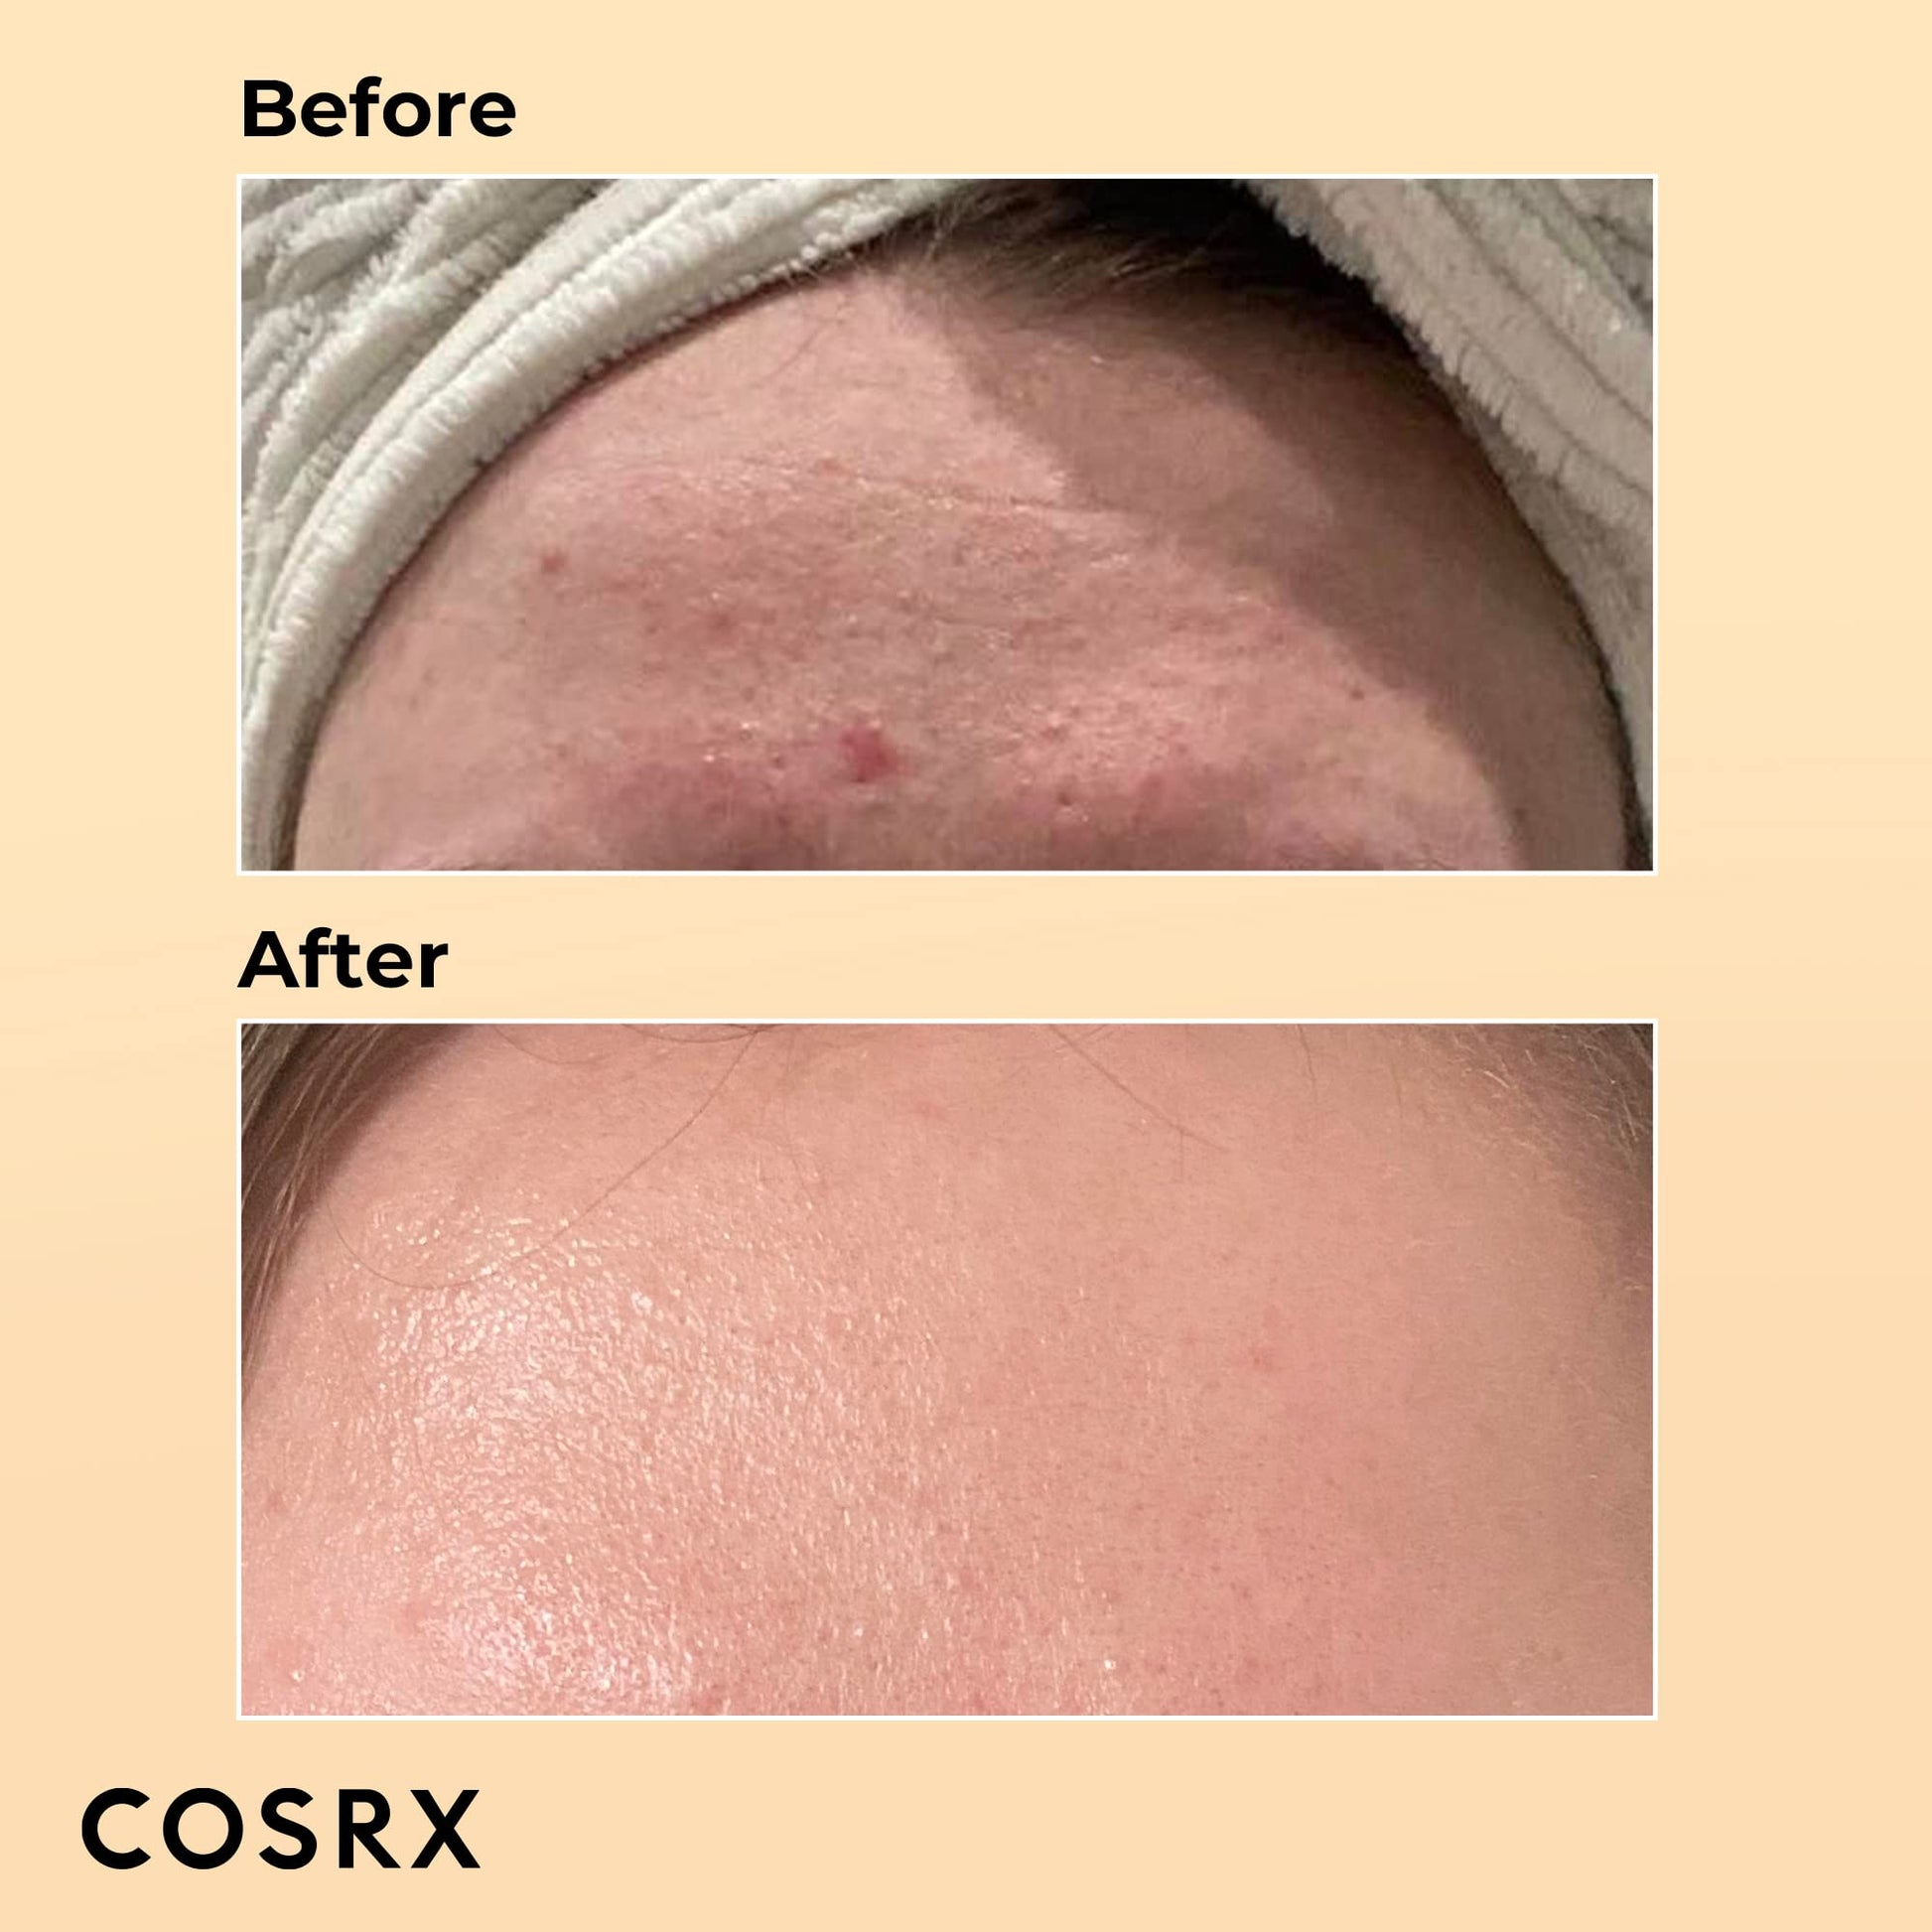 Before and after using COSRX Snail Mucin Essence (96%) - Hydrating Face Serum for Glowing Skin (100ml) - Korean Skincare, Dullness & Fine Lines